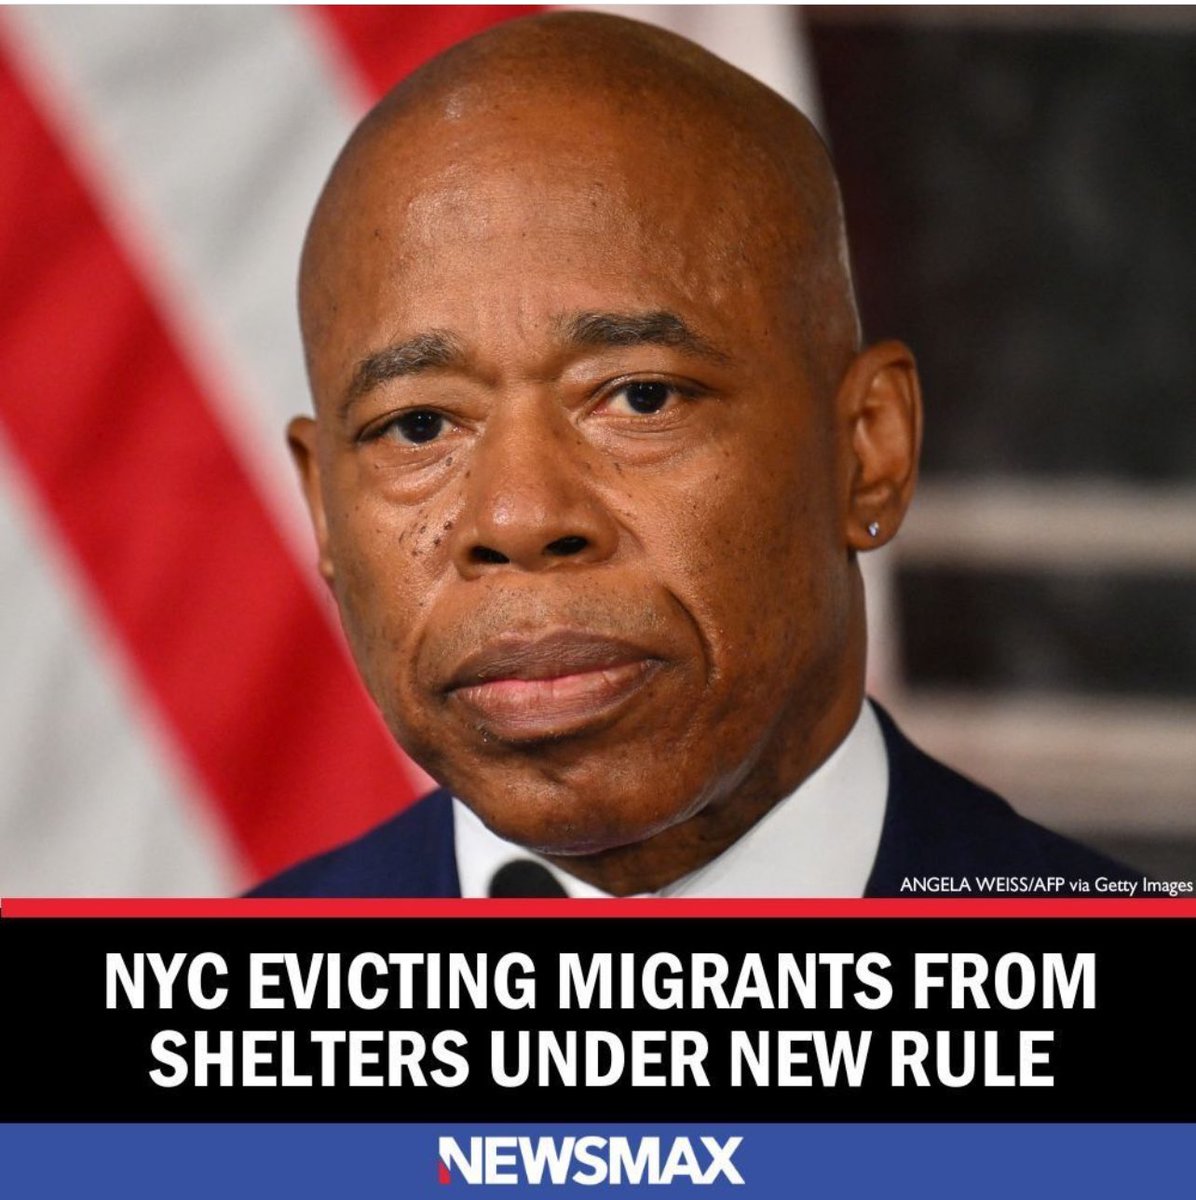 So much for NYC being a “sanctuary city”. All these liberals want to allow illegal alien’s into our county unless they have to personally do something about it such as taking them in. @NYCMayor - what say you?